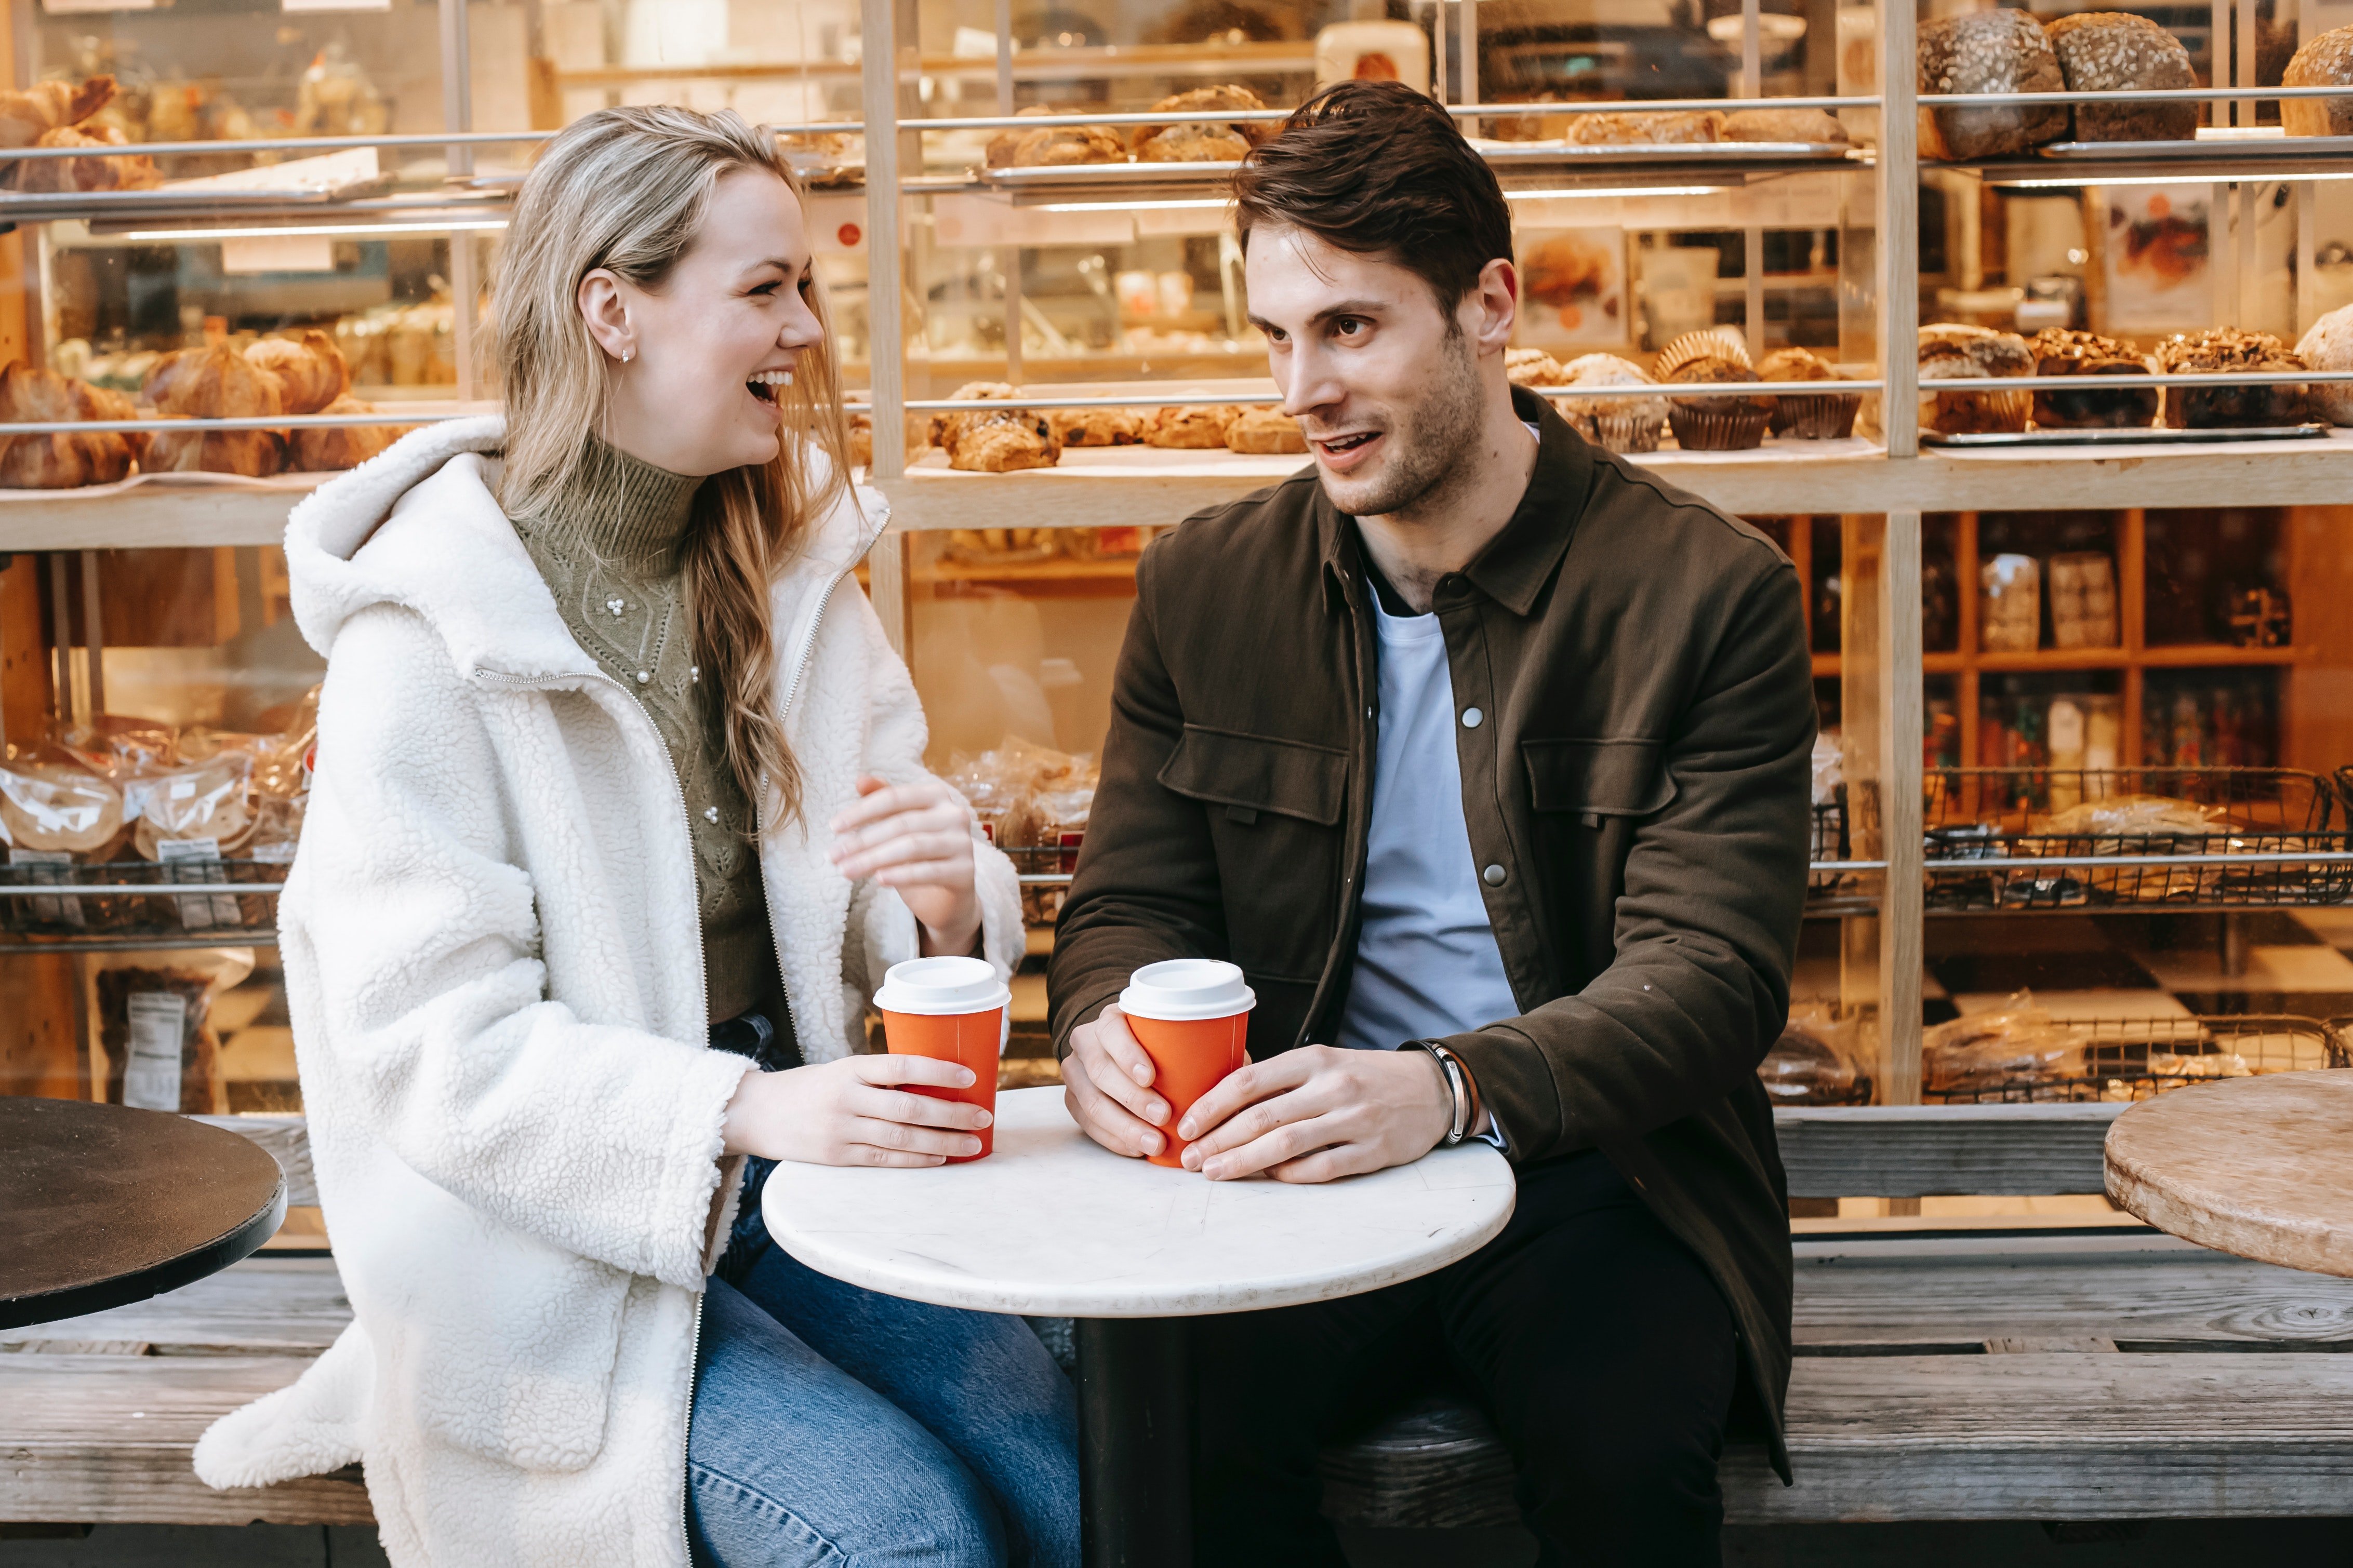 Jacob invited Linda to join him for a quick coffee. | Source: Pexels